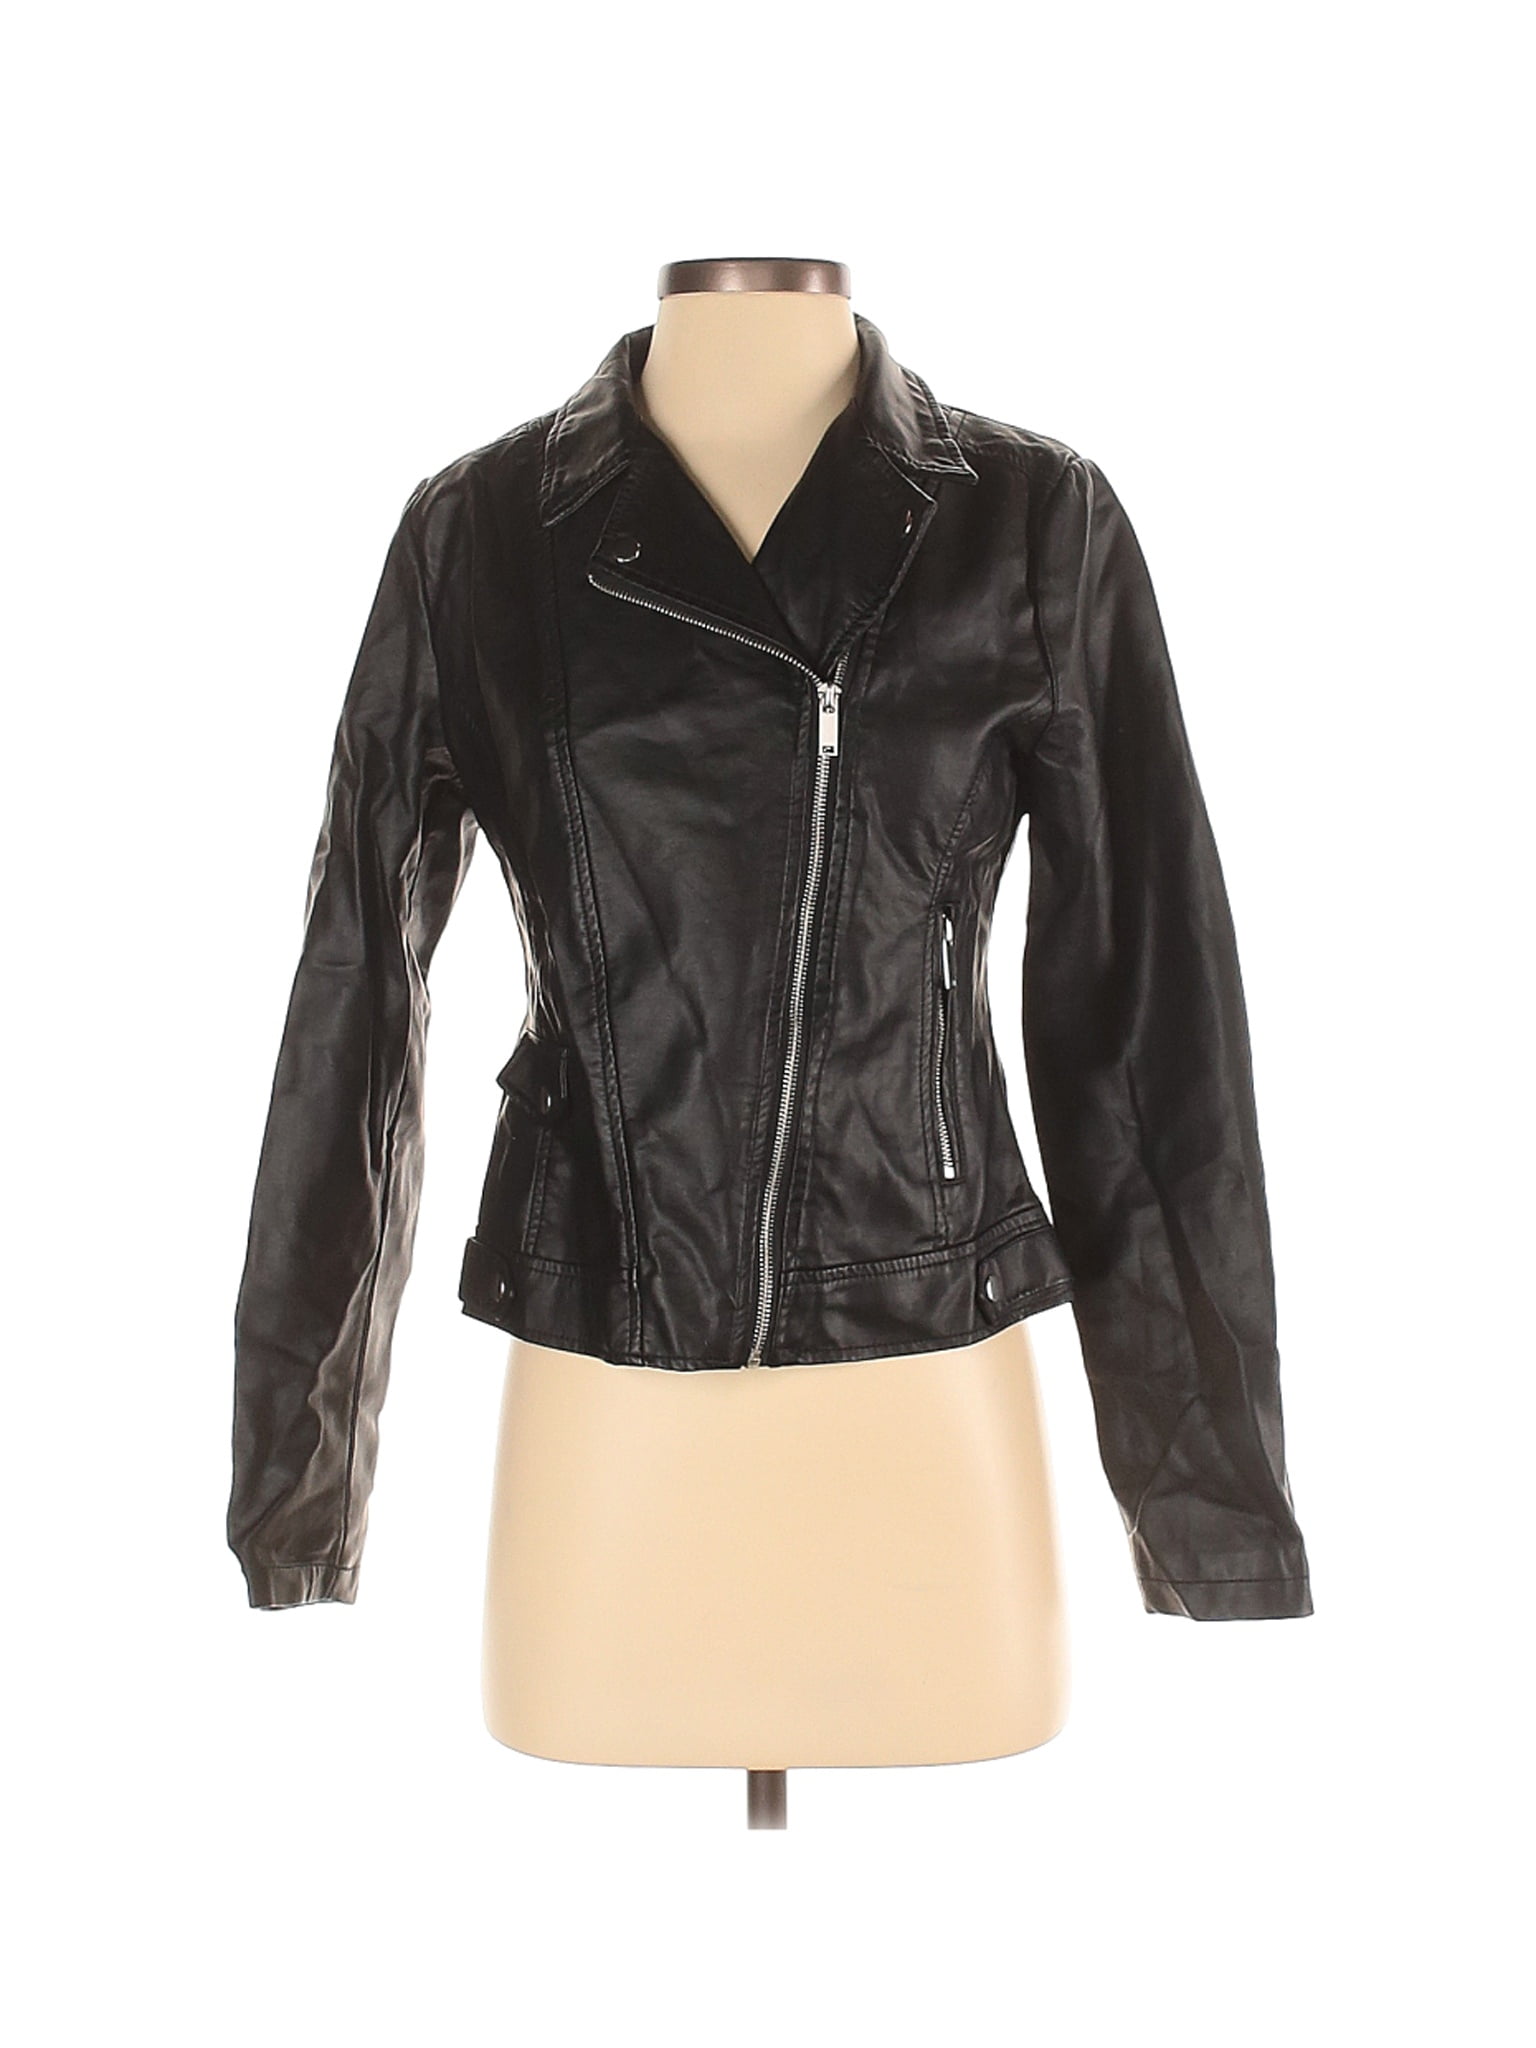 Primark - Pre-Owned Primark Women's Size 6 Faux Leather Jacket ...